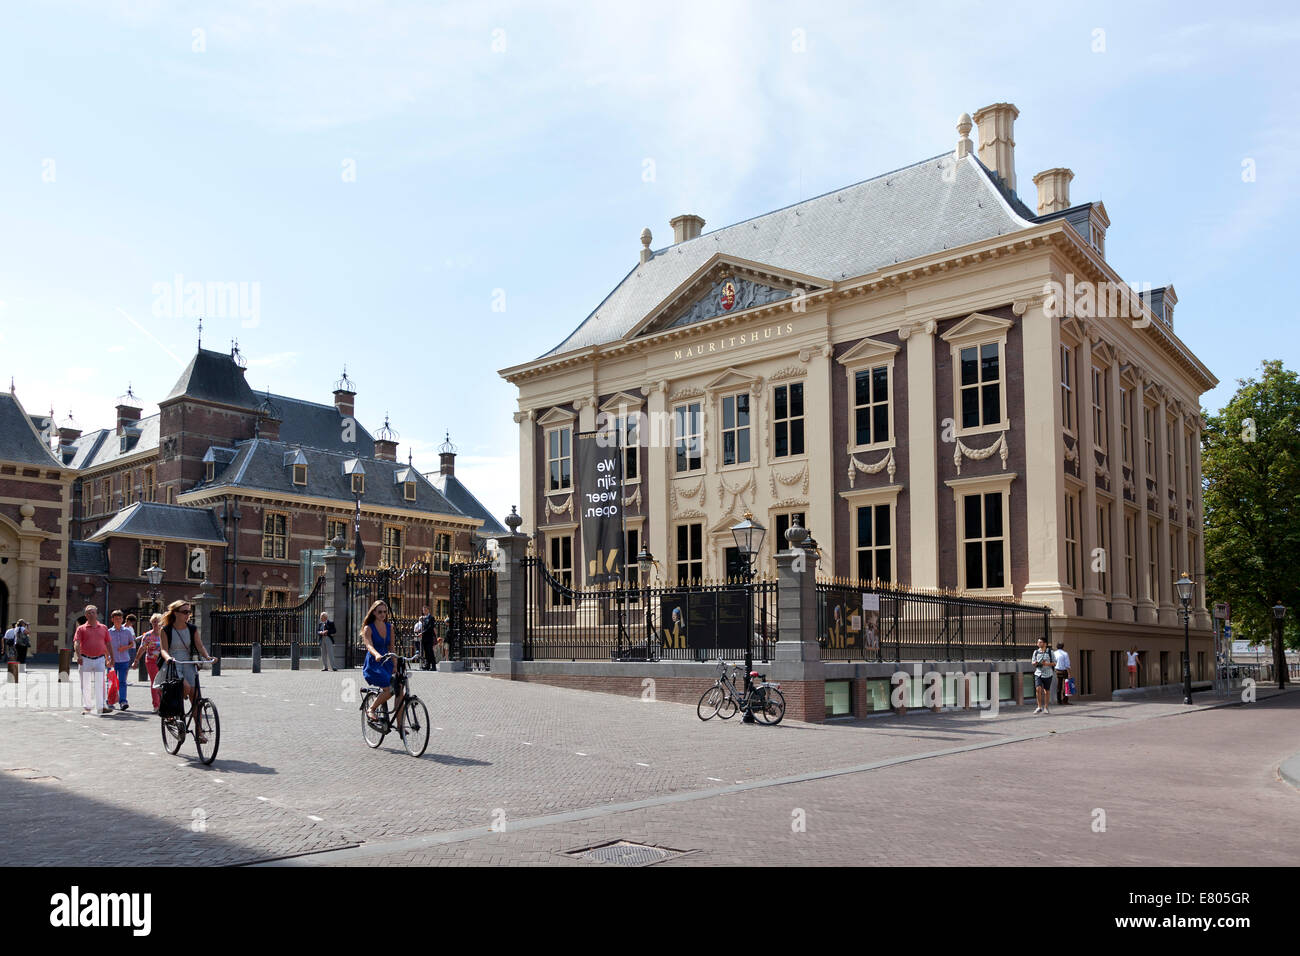 Mauritshuis museum in The Hague, Holland Stock Photo